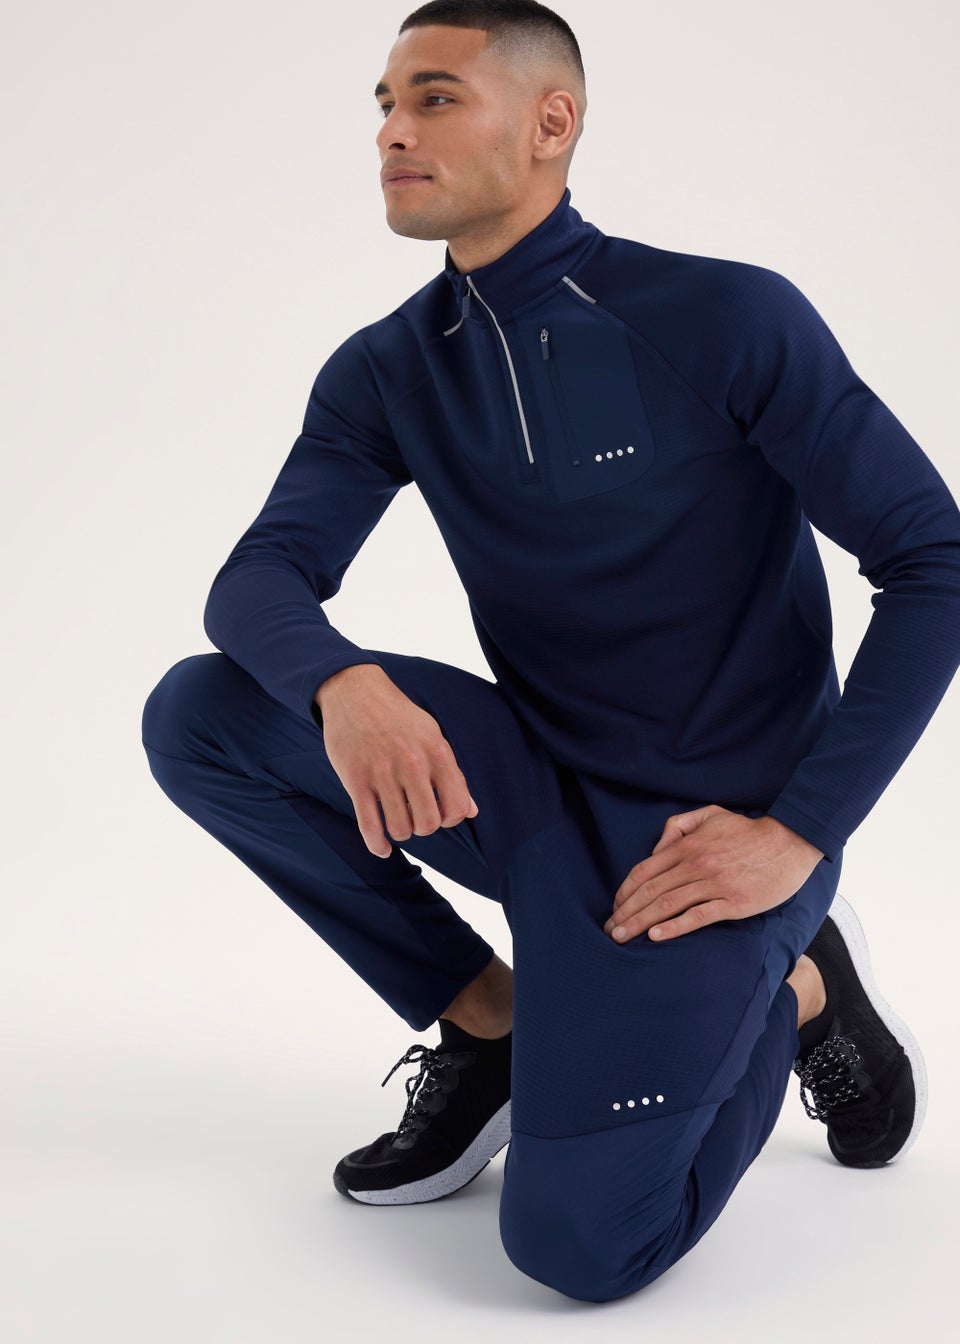 Souluxe Navy Panel Sports Joggers